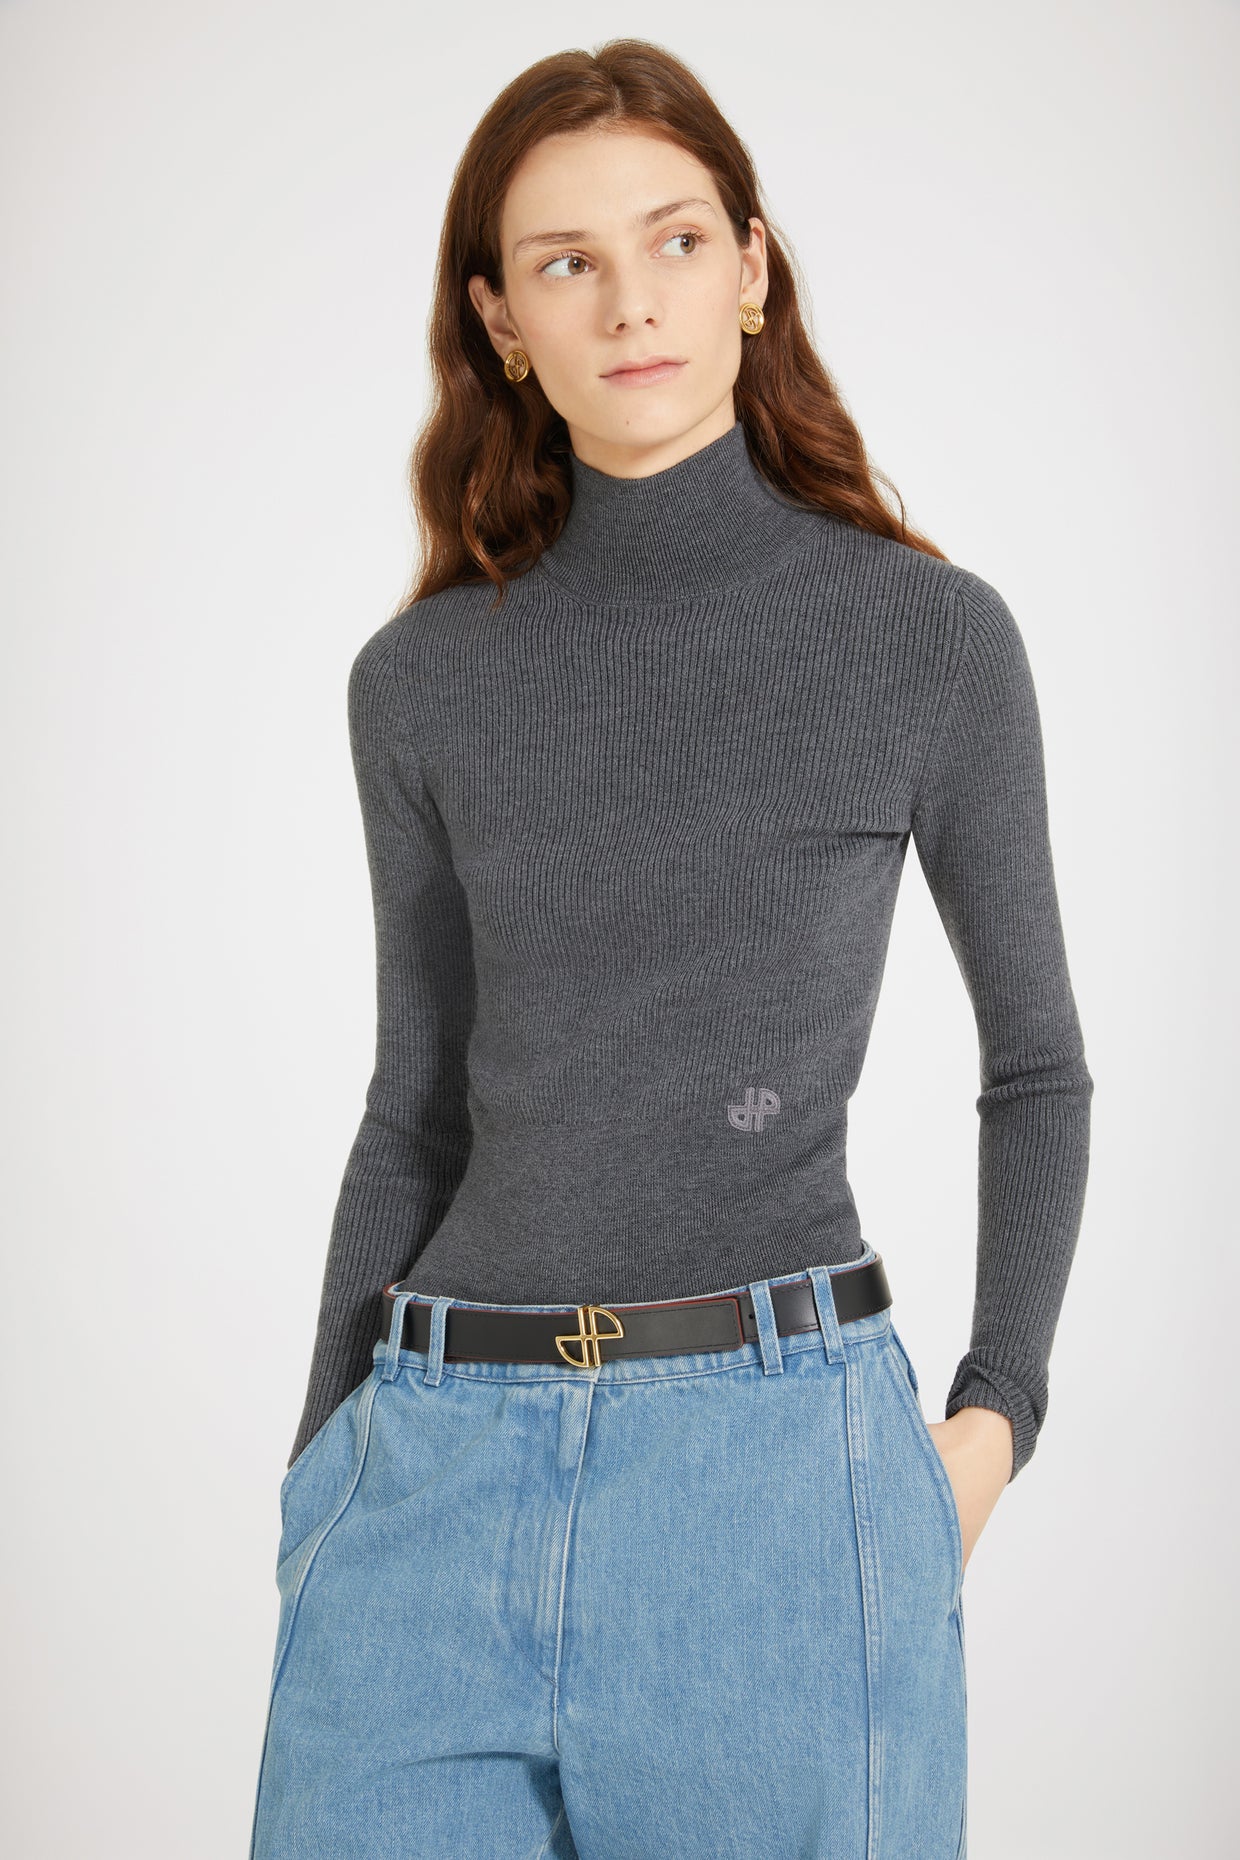 Patou  Knitwear for women, designer sweaters for ladies 